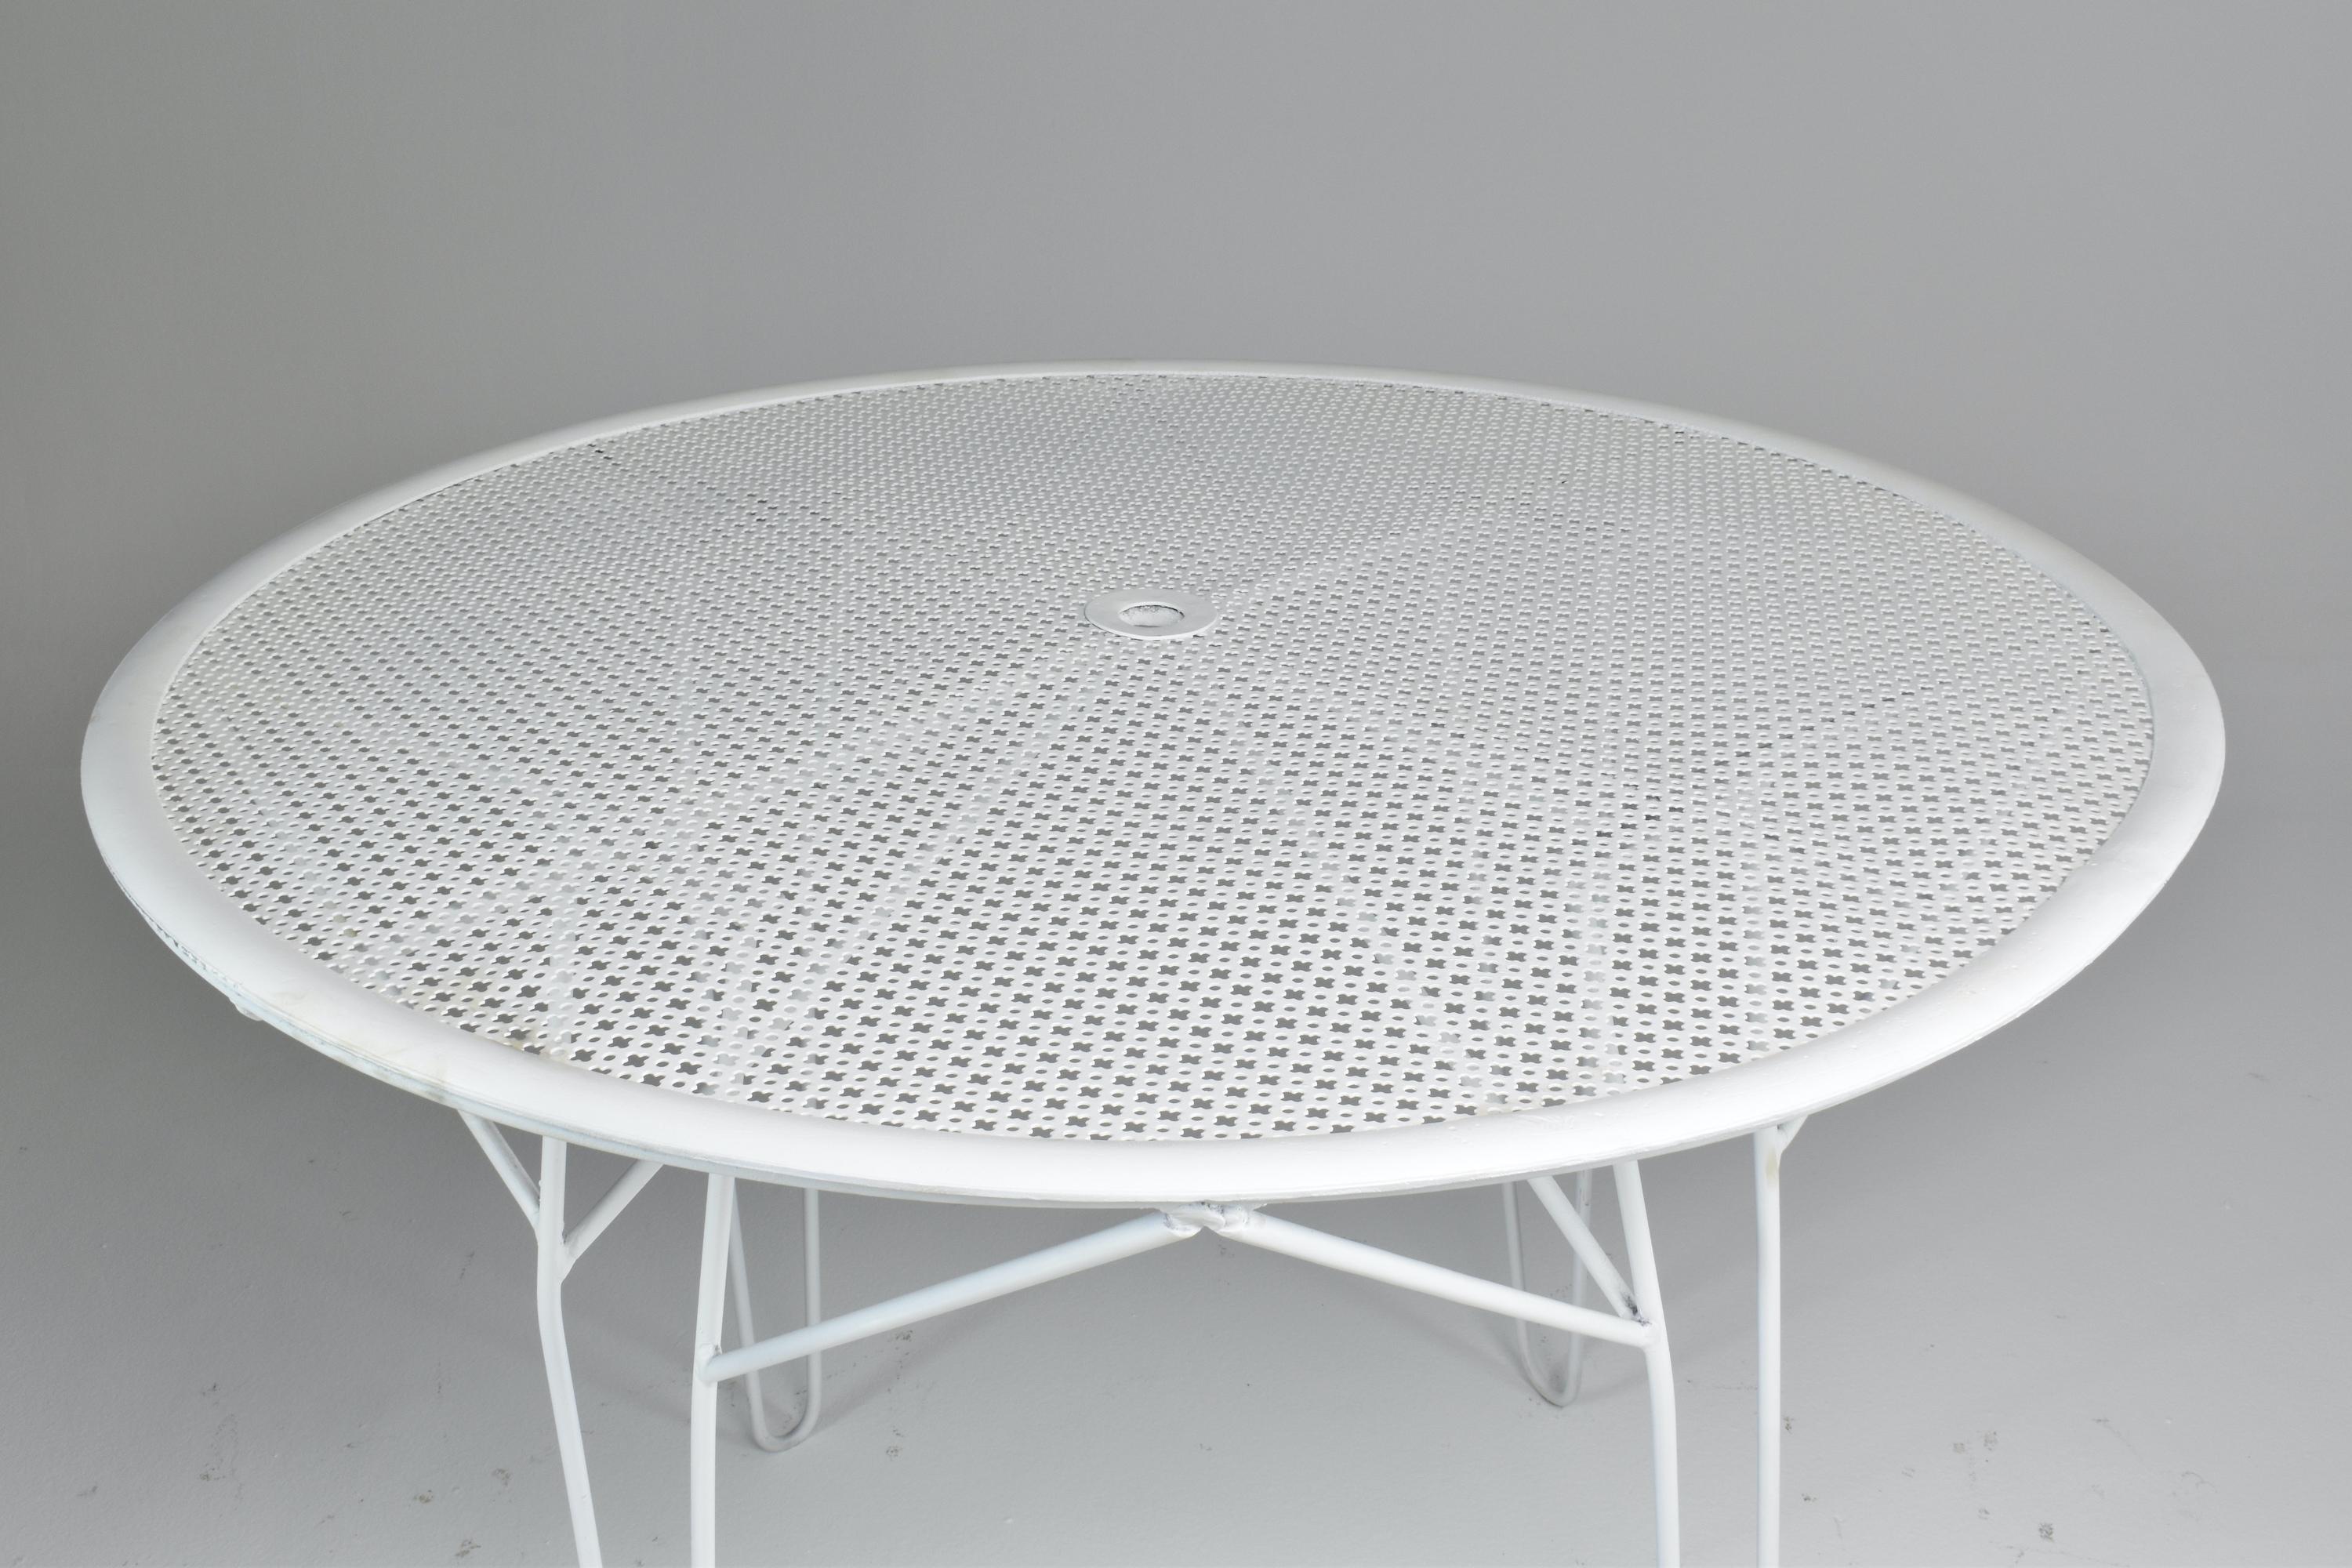 A beautiful circular garden table by the iconic French mid-century designer Mathieu Mategot. This collectible piece is made of his signature perforated sheet and white tubular lacquered steel. 
France. Circa 1950's. 

-----
We are an exhibition